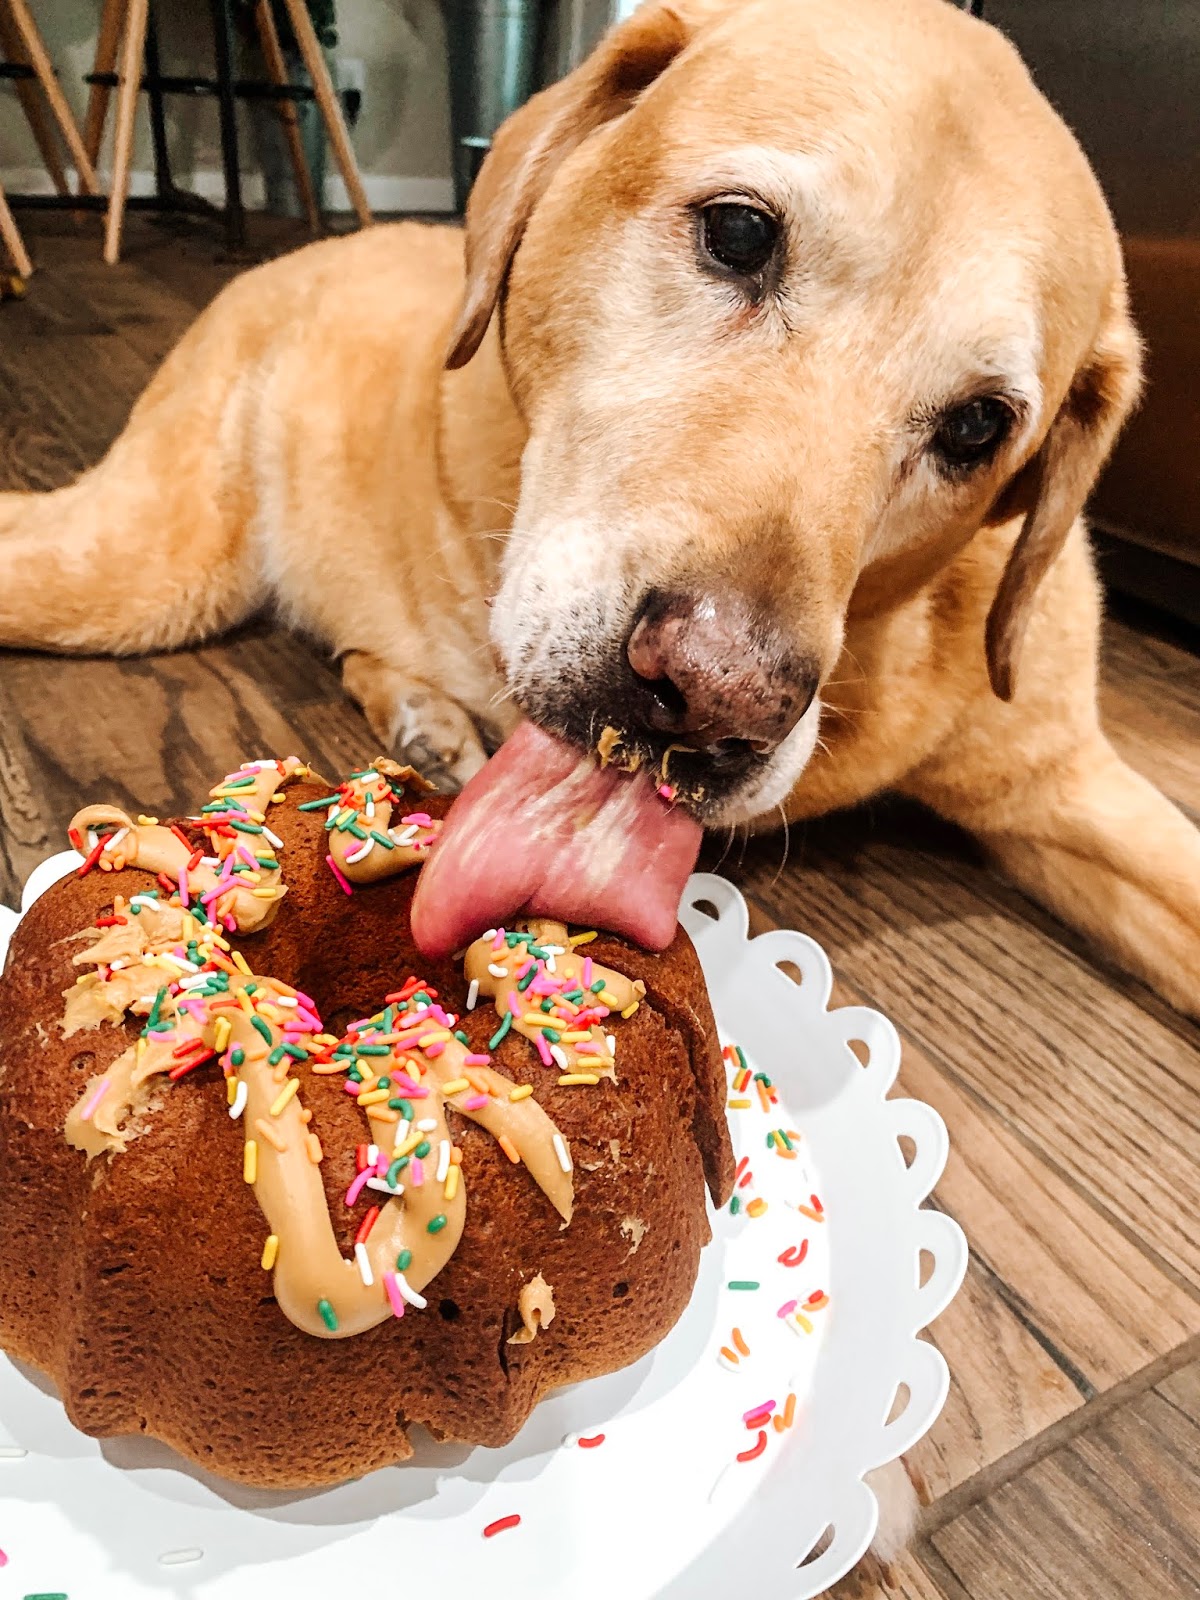 My Peanut Butter Dog Birthday Cake Recipe - Treat Dreams...are made of this